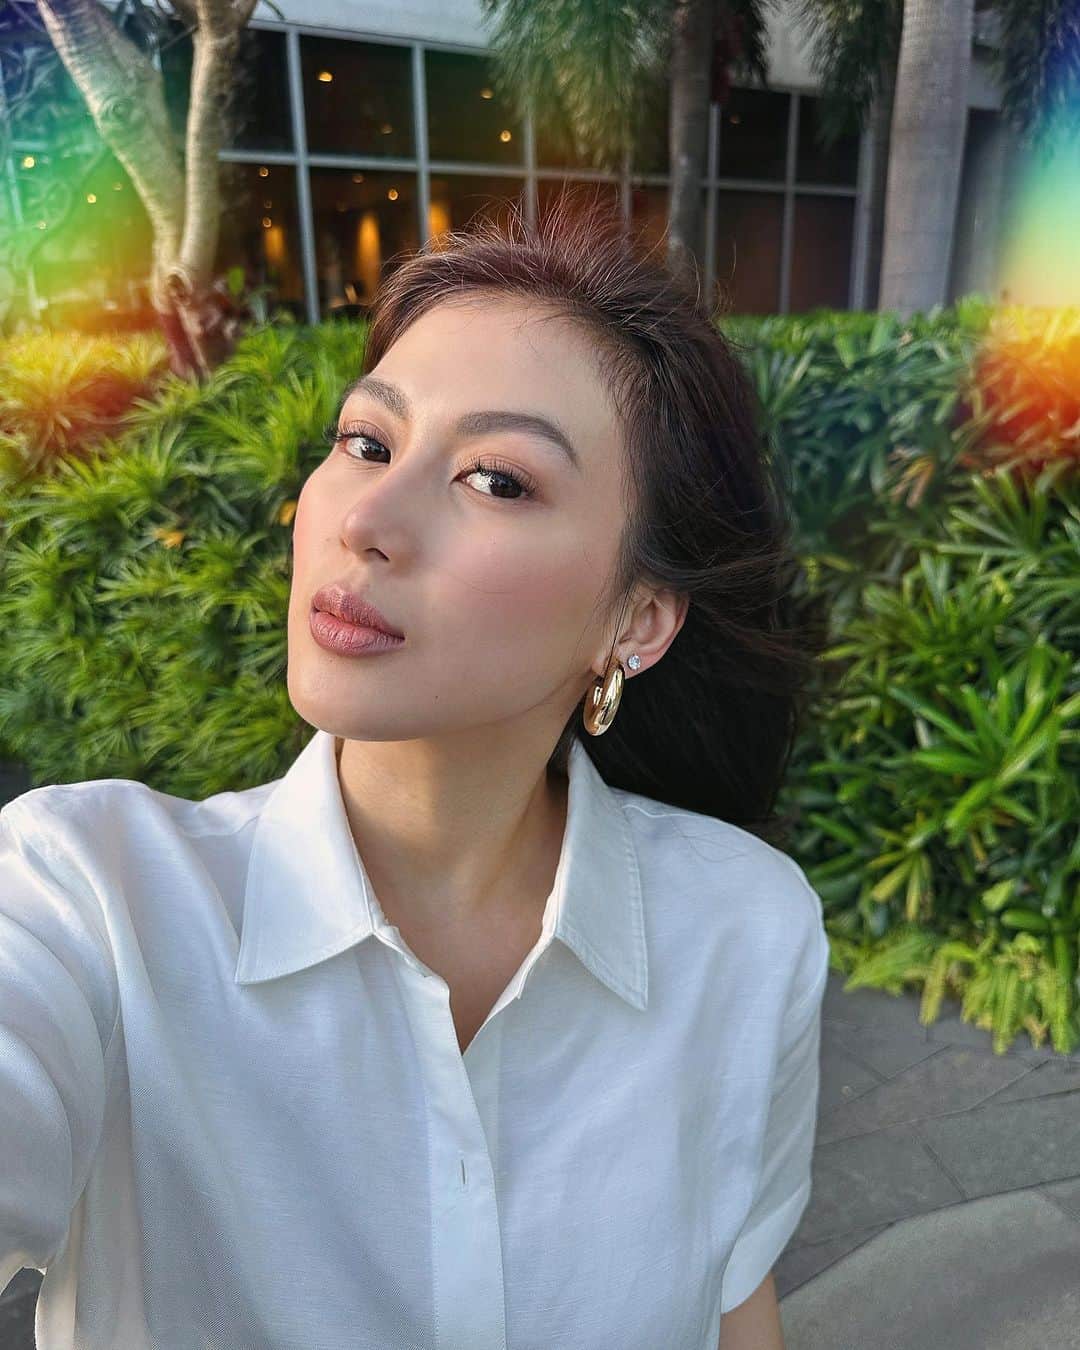 Alex Gonzagaのインスタグラム：「Skin glow up but make it affordable! Sakto sa 11.11 sale! 5 products in 1 package na 😱Thanks to @snailwhitephils’ NEW Ultra Glow Snail Serum and All-In-One Snail Cream are powered with Snail Slime, a miracle ingredient that can give you visibly smooth, radiant, and bouncy skin! Ito na yung sign niyo to make a great skinvestment with #AffordaGlow prices ✨  Get the NEW Glow Up Snail Starter Kit for just P799 this 11.11! Available on Shopee kaya add to cart na 🛒 #GlowHoliday #SNAILWHITE」